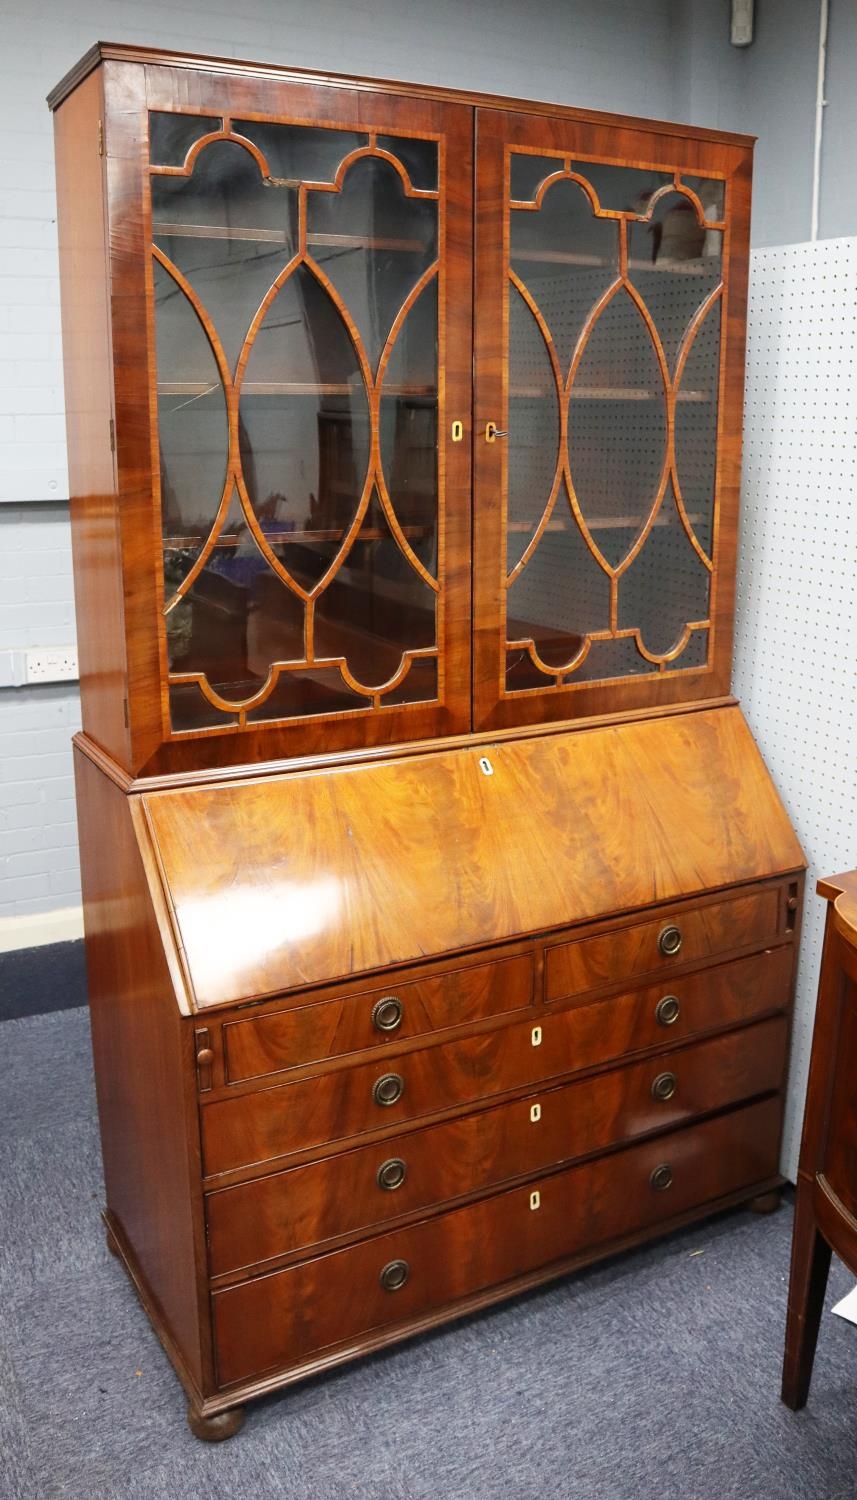 LATE GEORGIAN FIGURED AND CROSSBANDED MAHOGANY BUREAU BOOKCASE, the upper section with a pair of